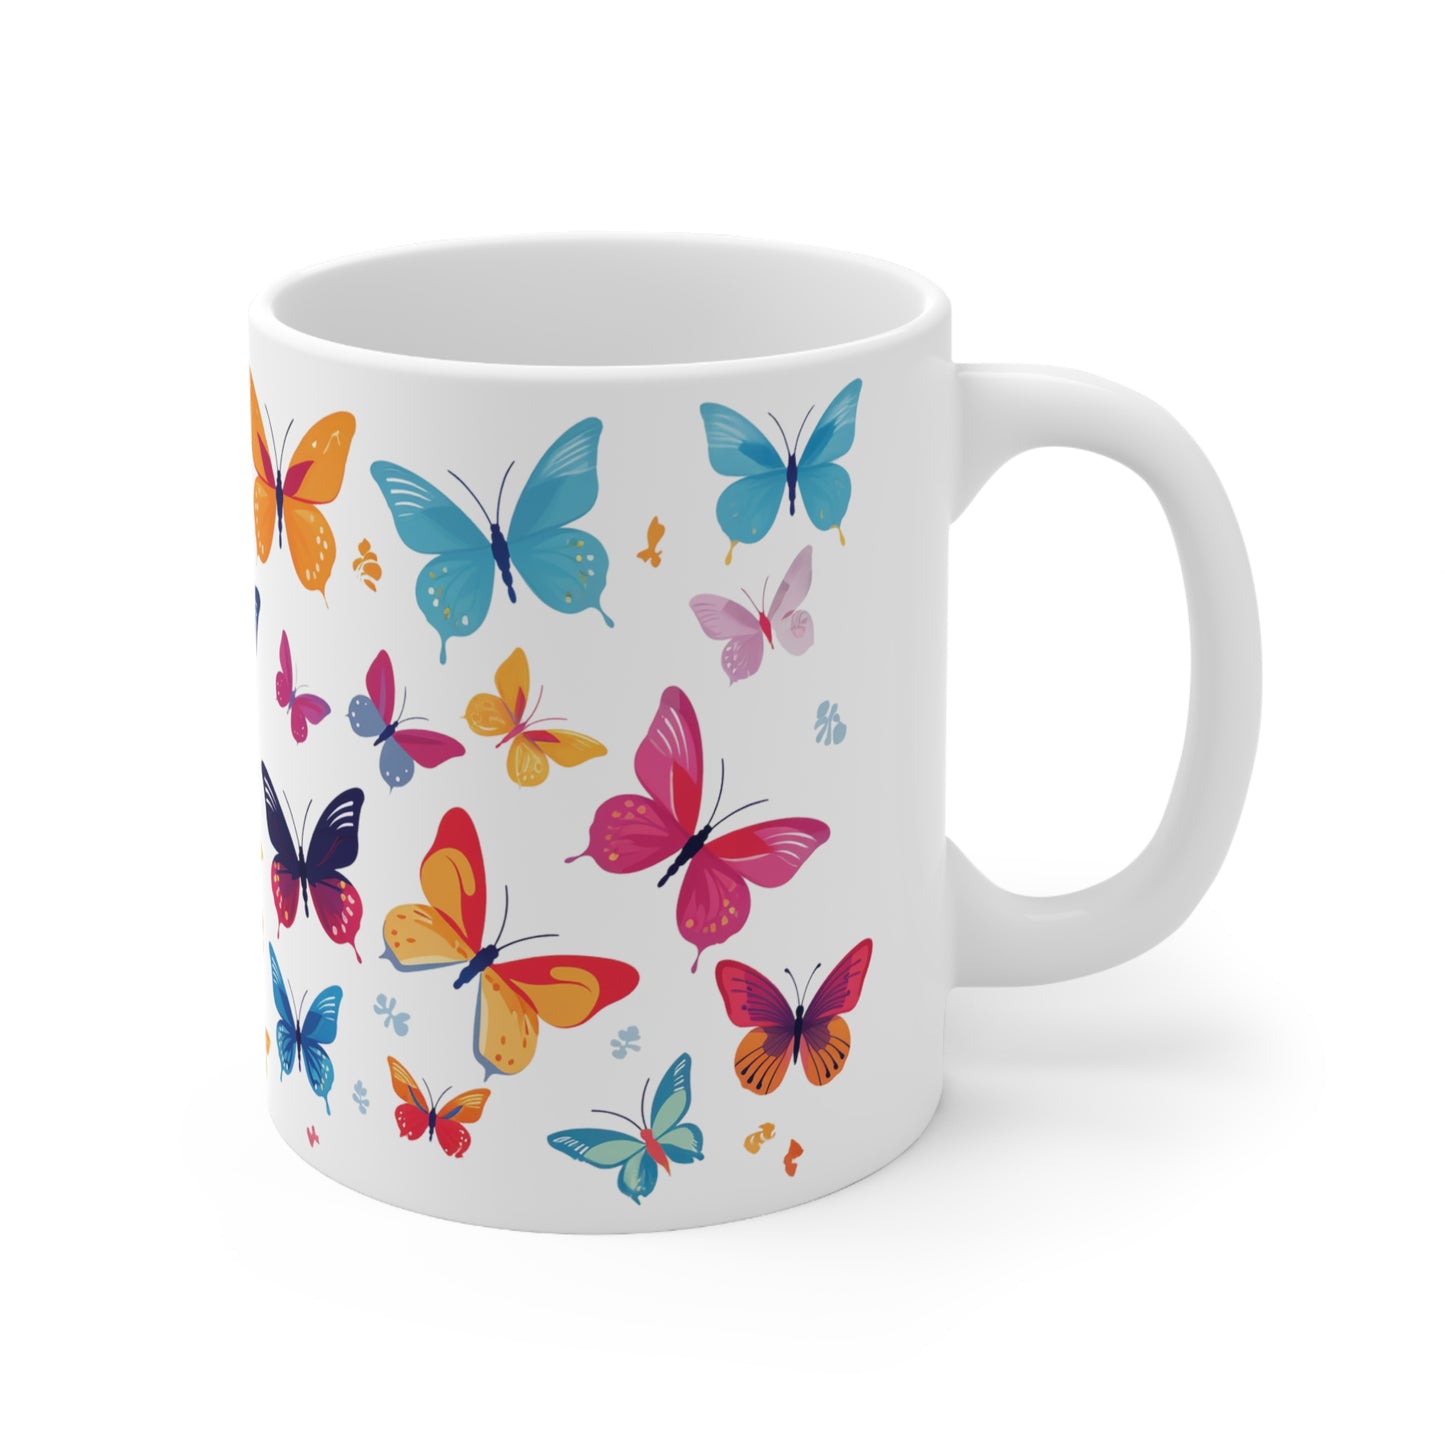 Butterfly Mug, Colorful Butterfly Tea Cup, Mother's Day Gift, Butterfly Pattern Mug, Butterfly Lover Mug, Butterfly Gift Idea, Gift for her